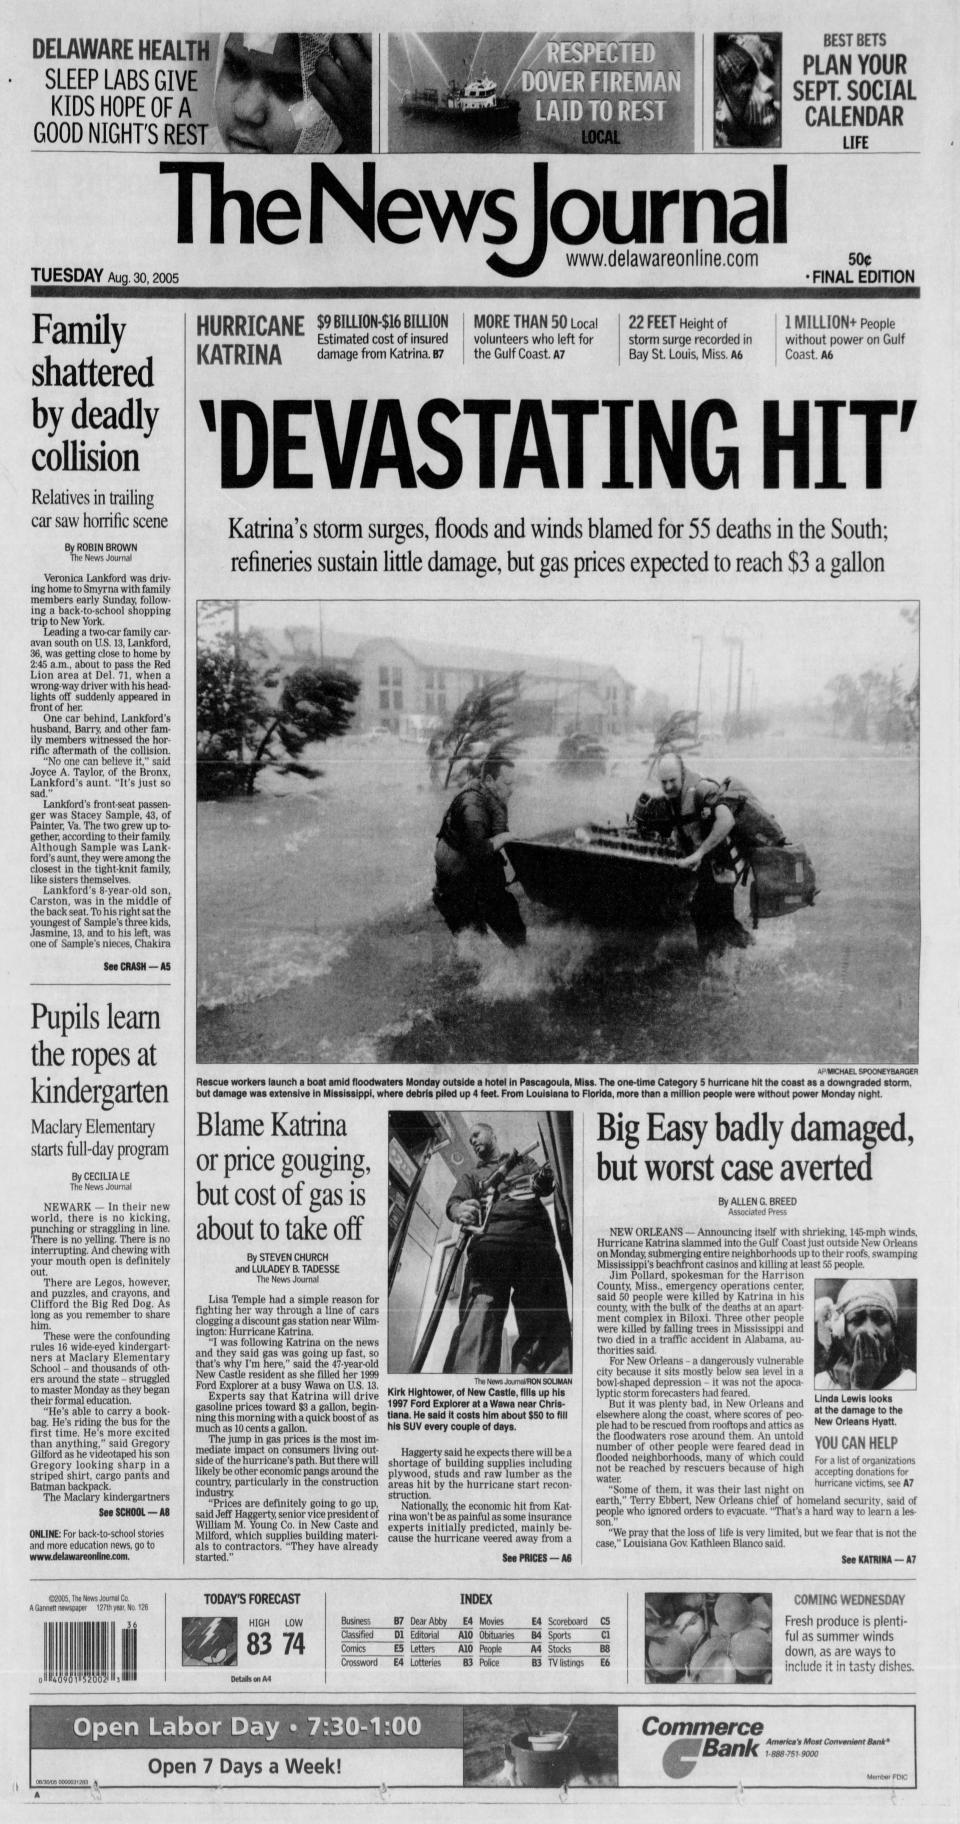 Front page of The News Journal from Aug. 30, 2005.